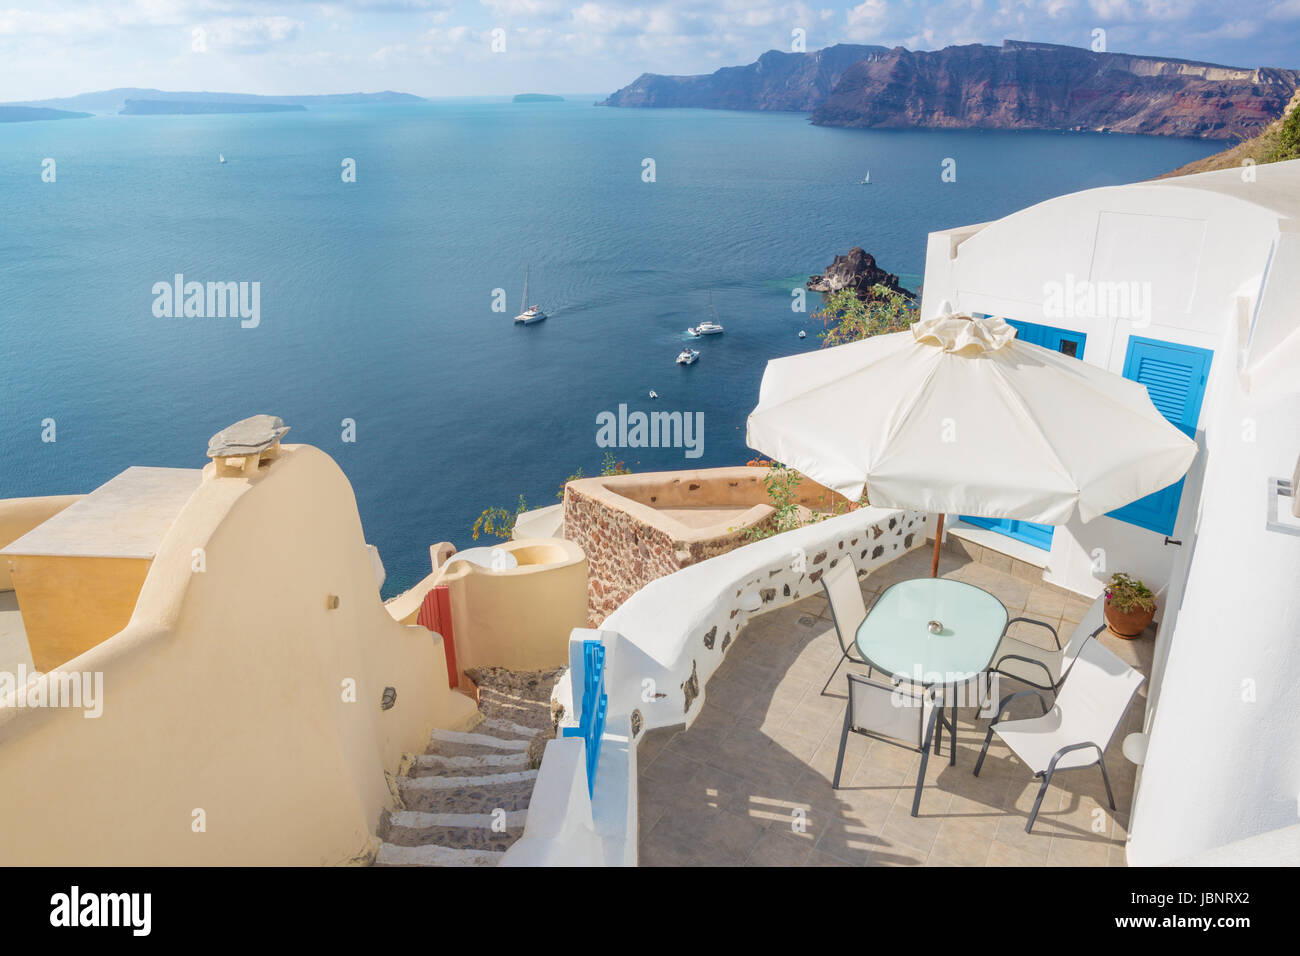 Santorini - The Oia and Therasia island in the background. Stock Photo